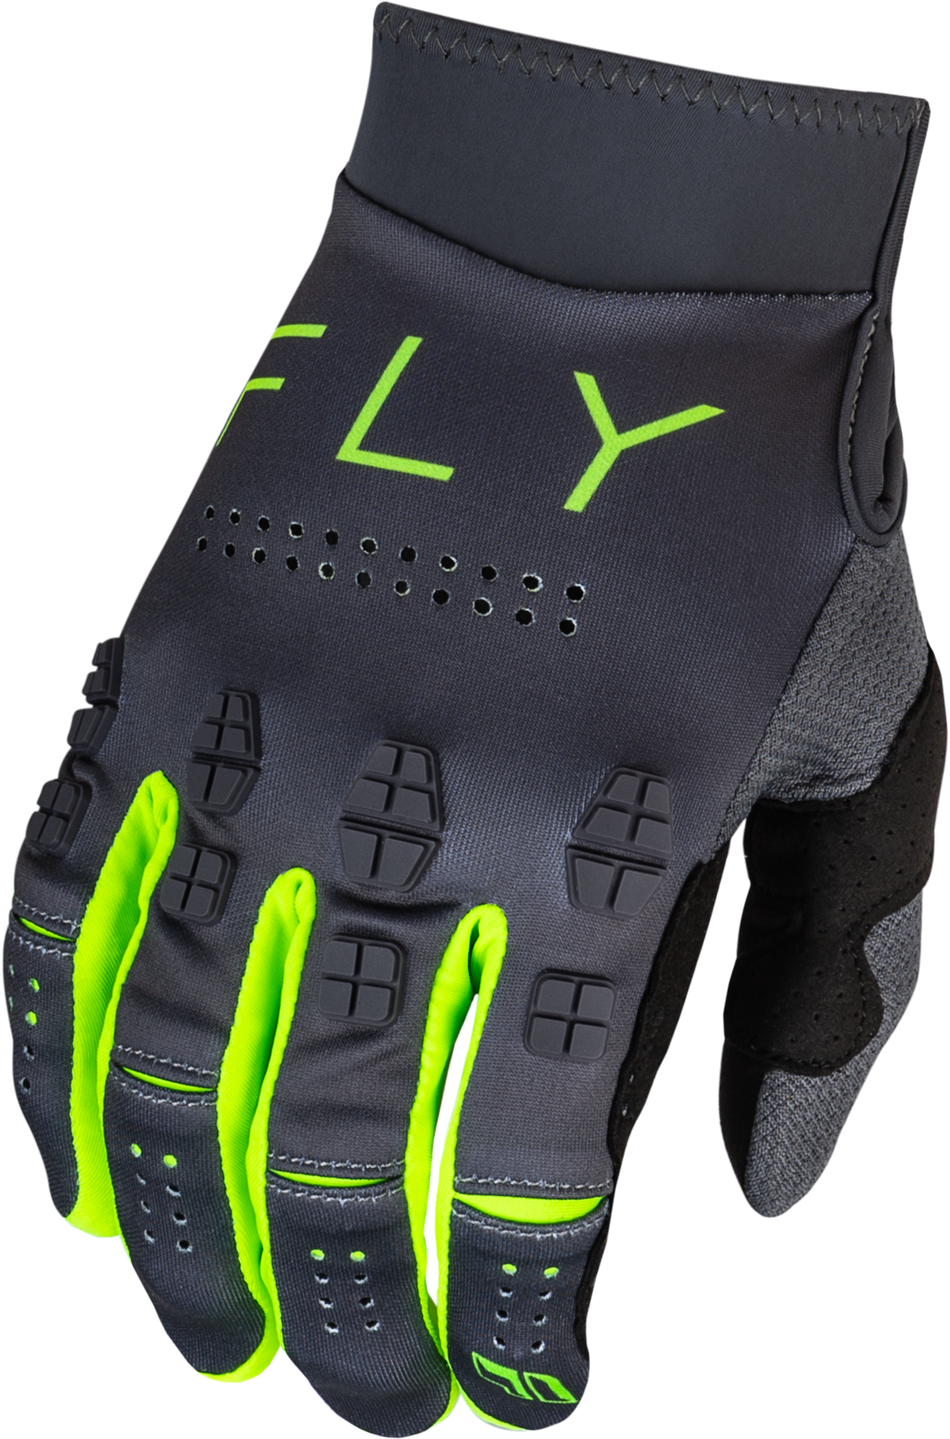 FLY RACING Evolution Dst Gloves Charcoal/Neon Green 3x 377-1113X